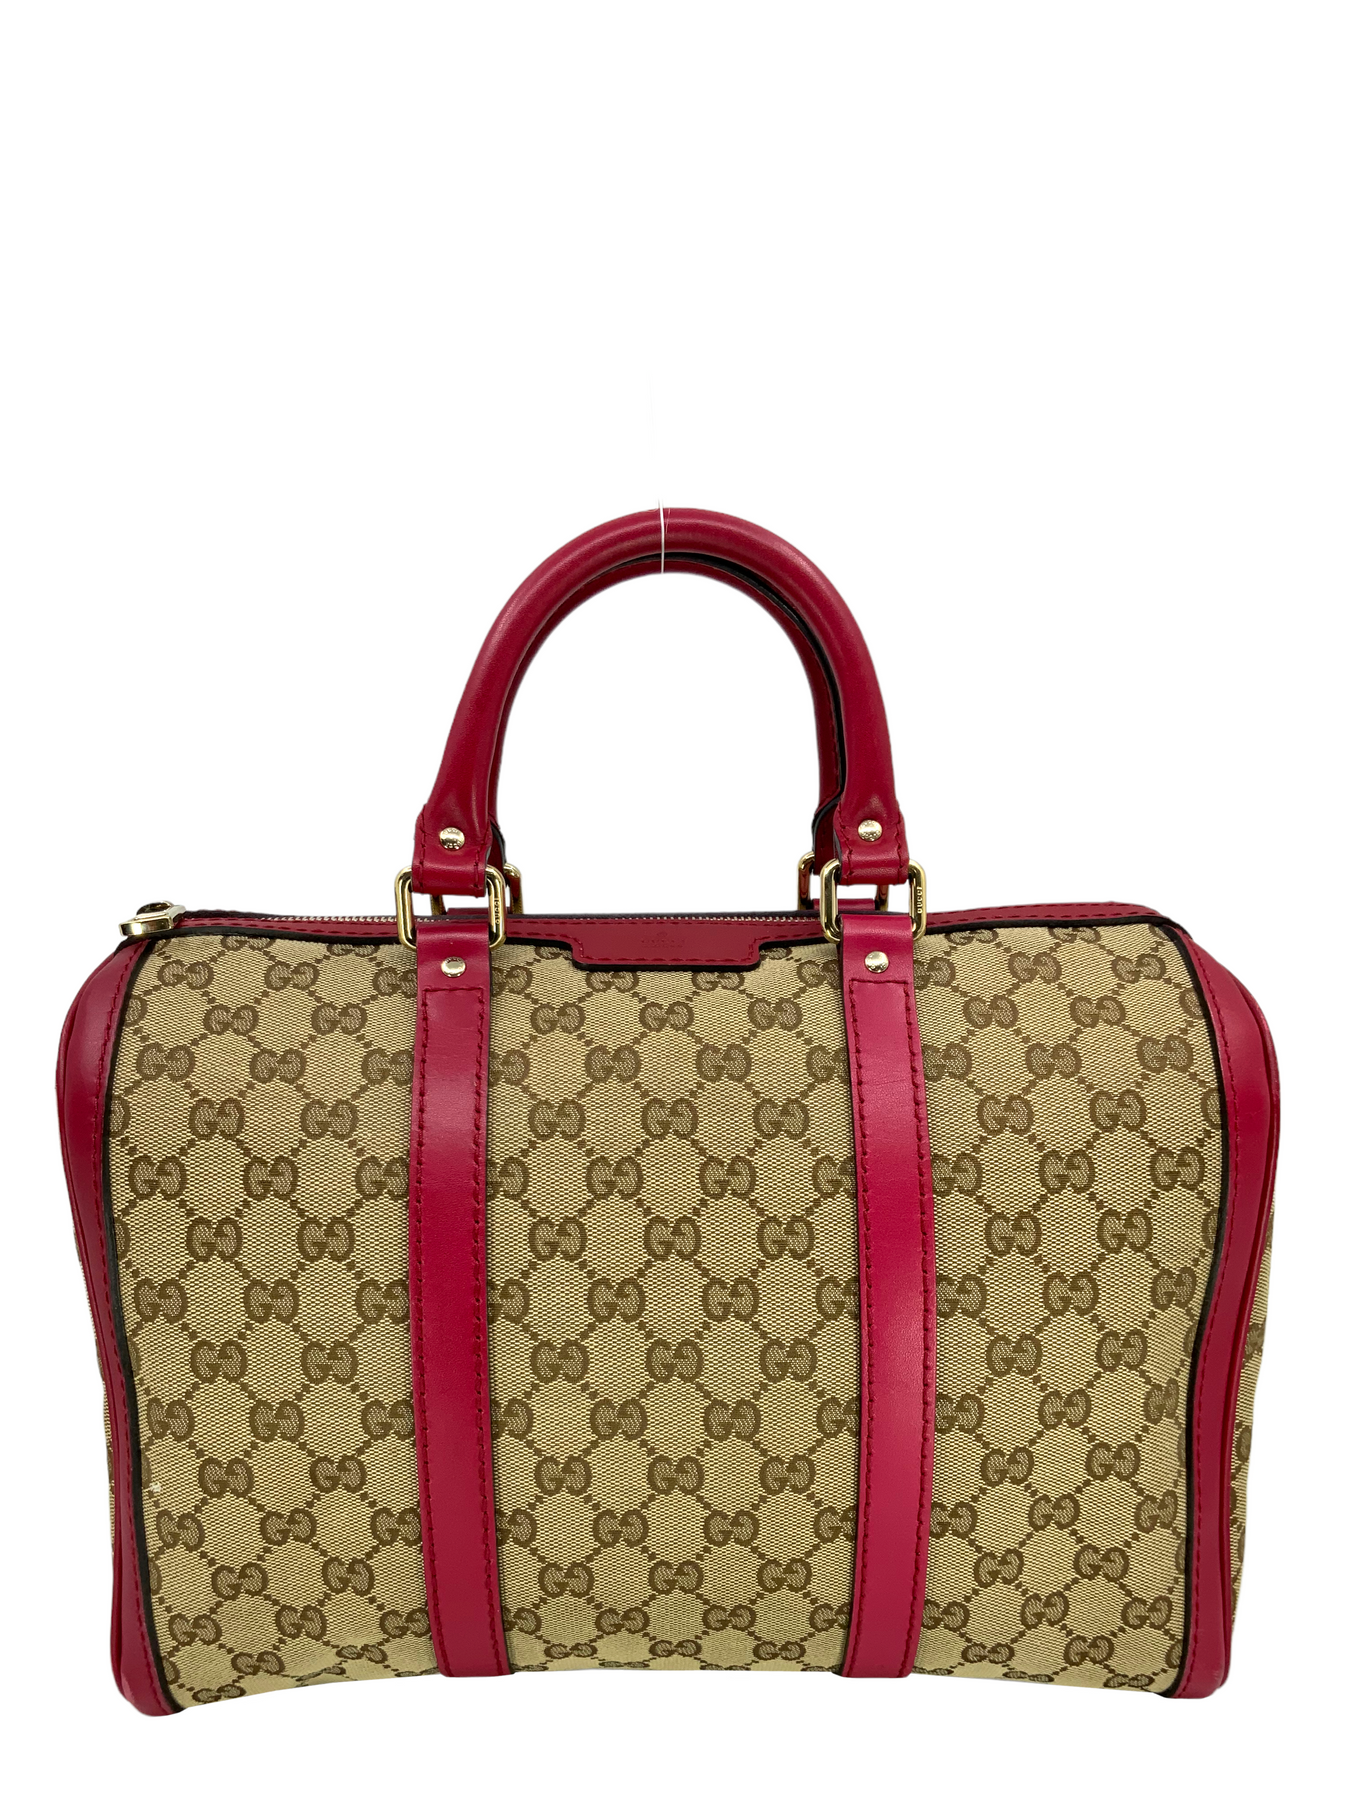 The 11 BEST Designer Work Bags ft. Louis Vuitton, Givenchy, YSL